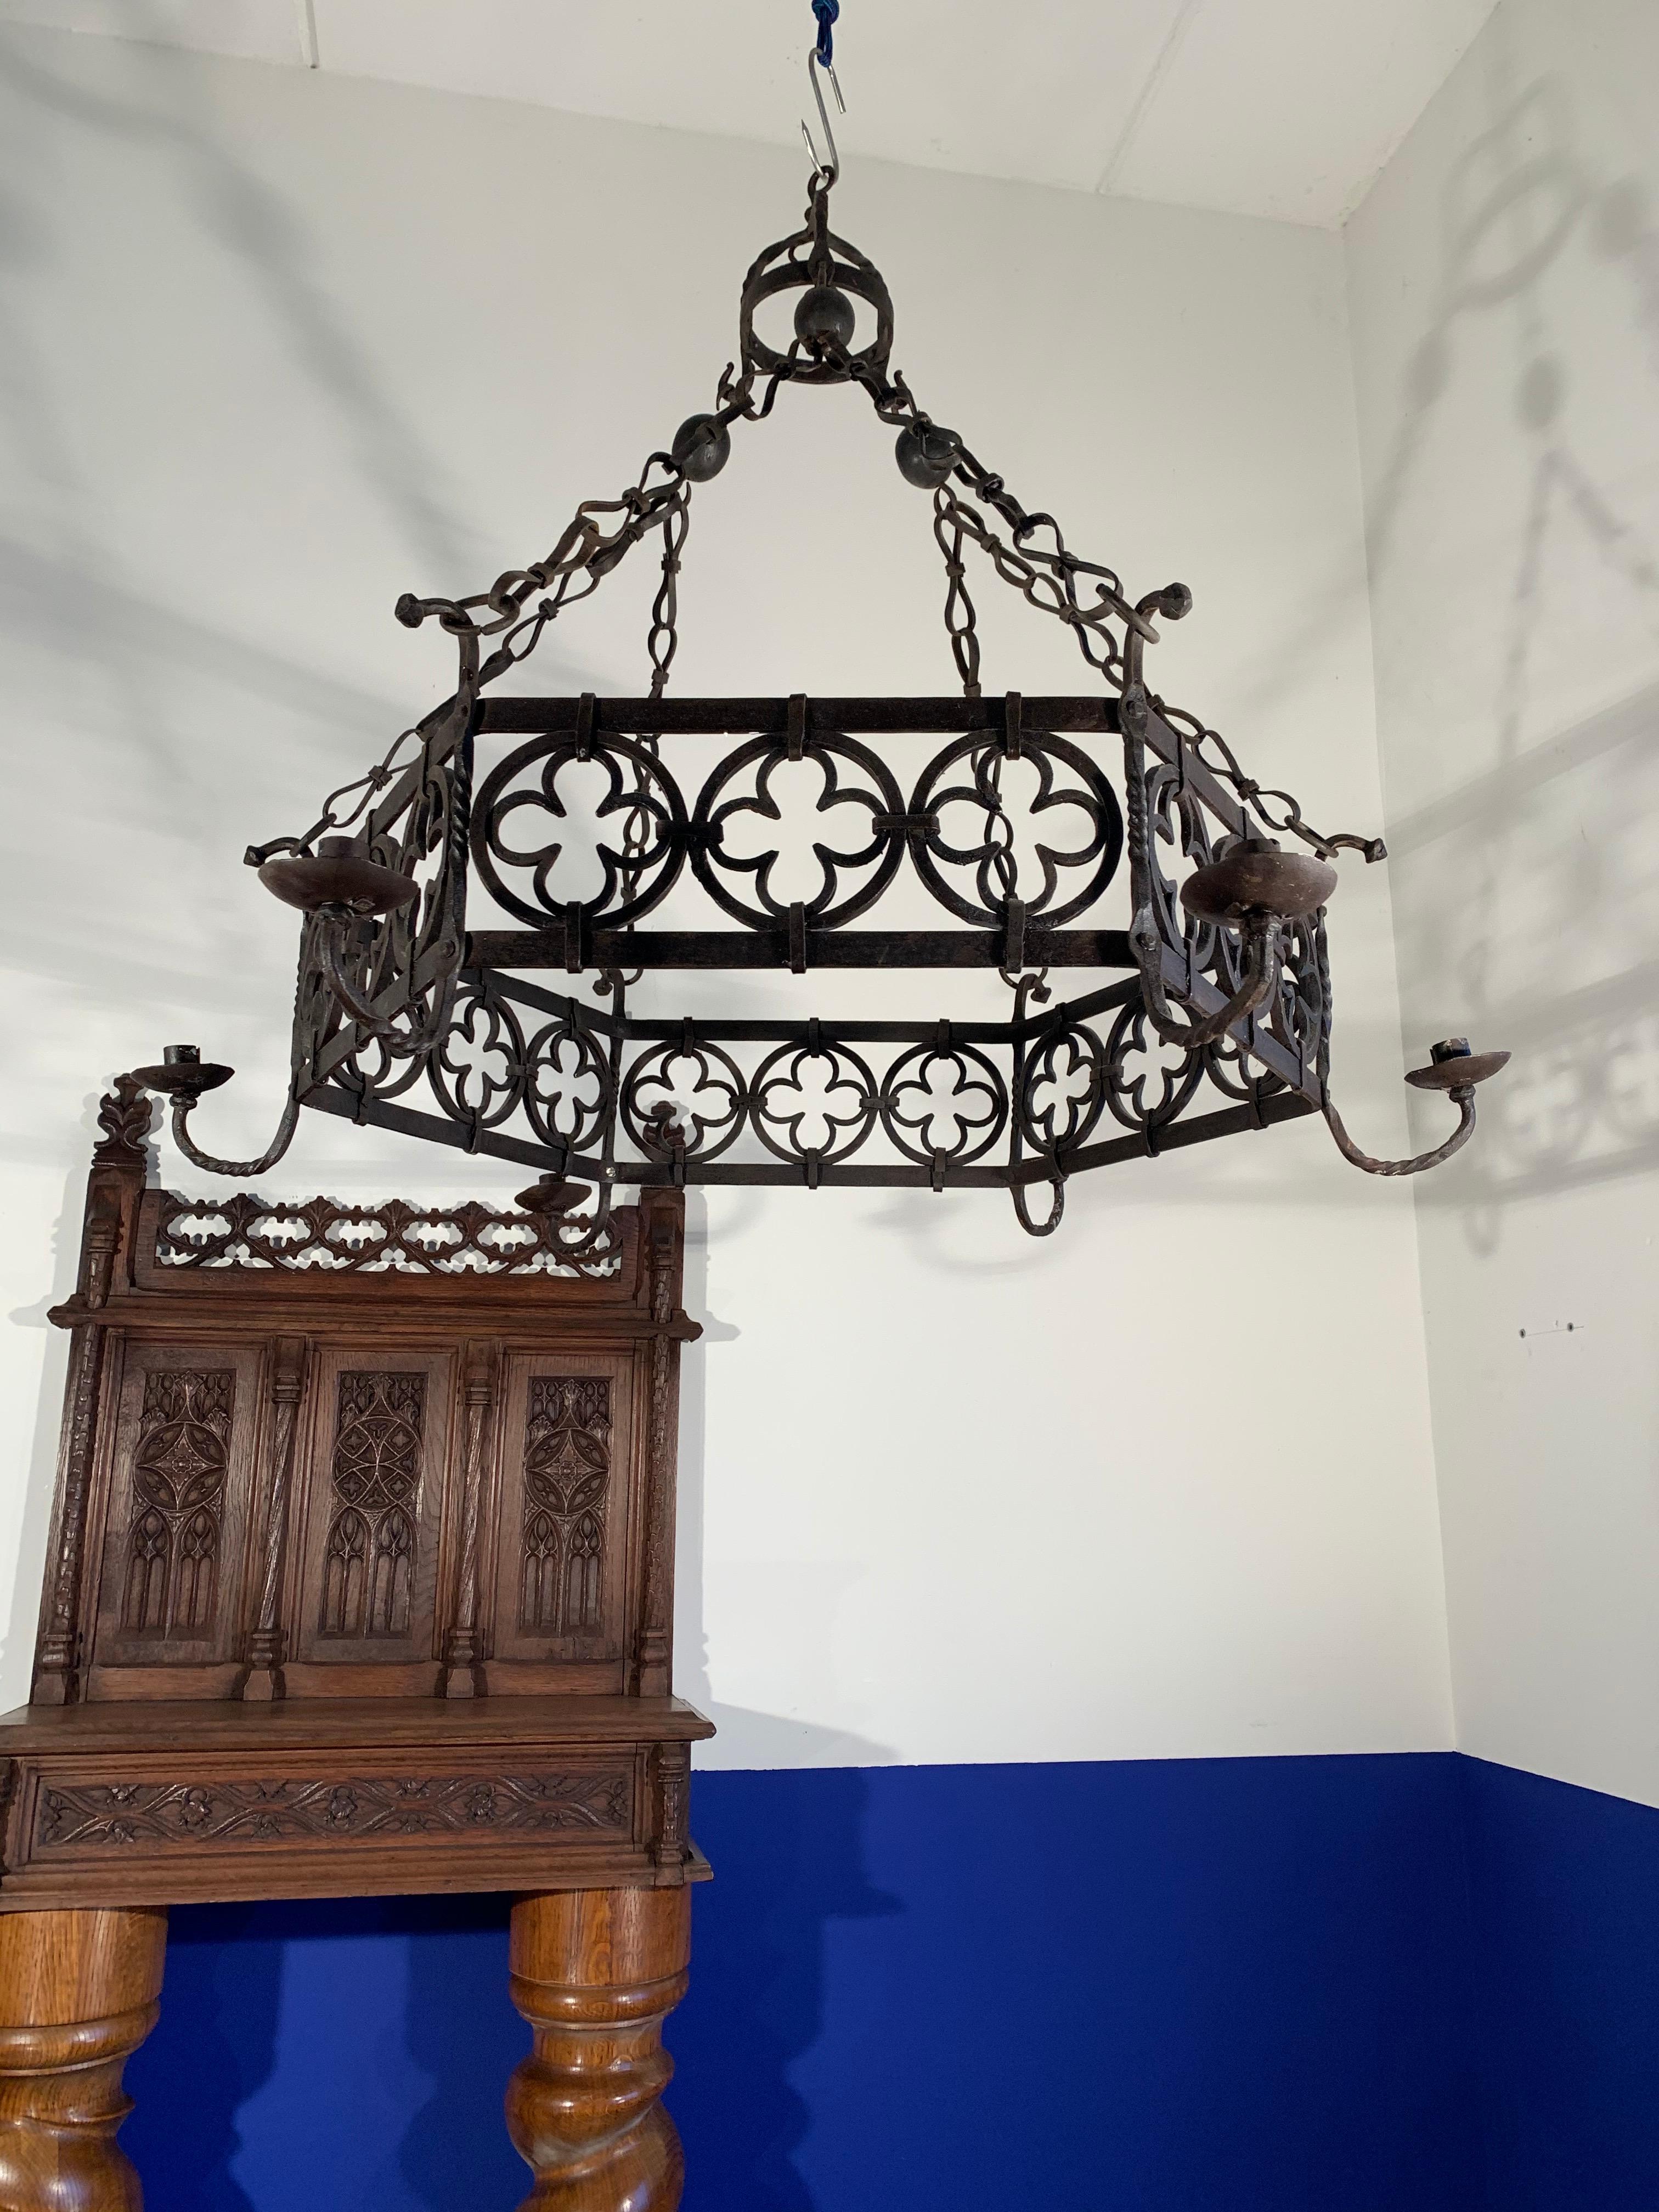 Large Gothic Revival Wrought Iron Chandelier for Dining Room / Restaurant Etc For Sale 1